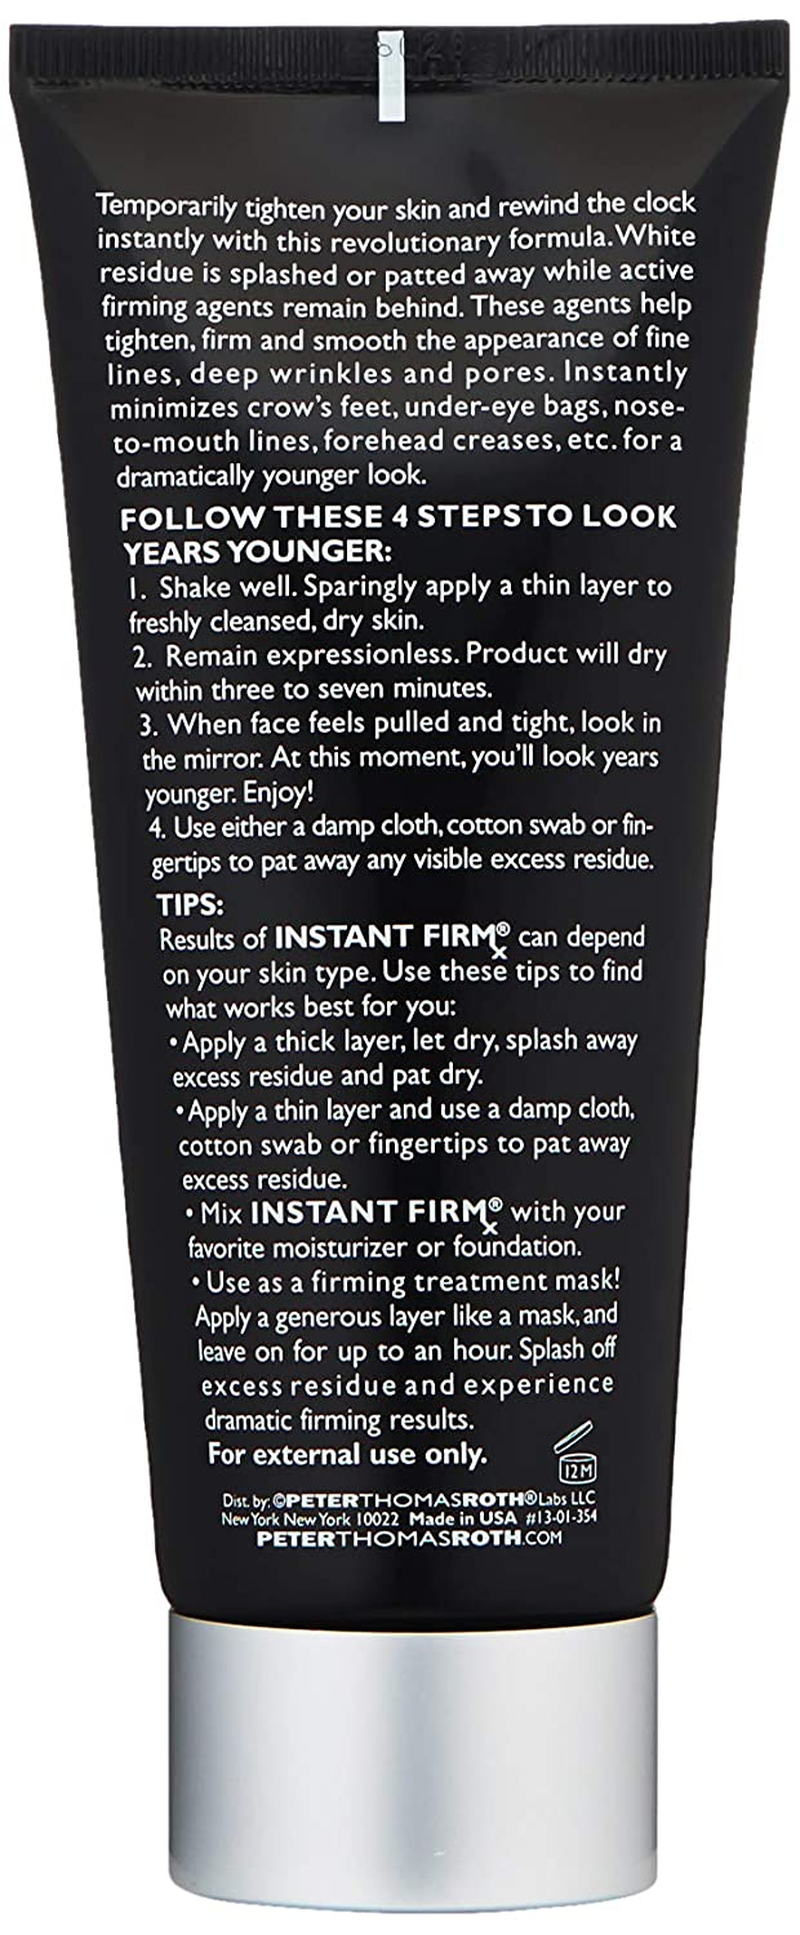 Peter Thomas Roth | Instant Firmx Temporary Face Tightener | Firm and Smooth the Look of Fine Lines, Deep Wrinkles and Pores